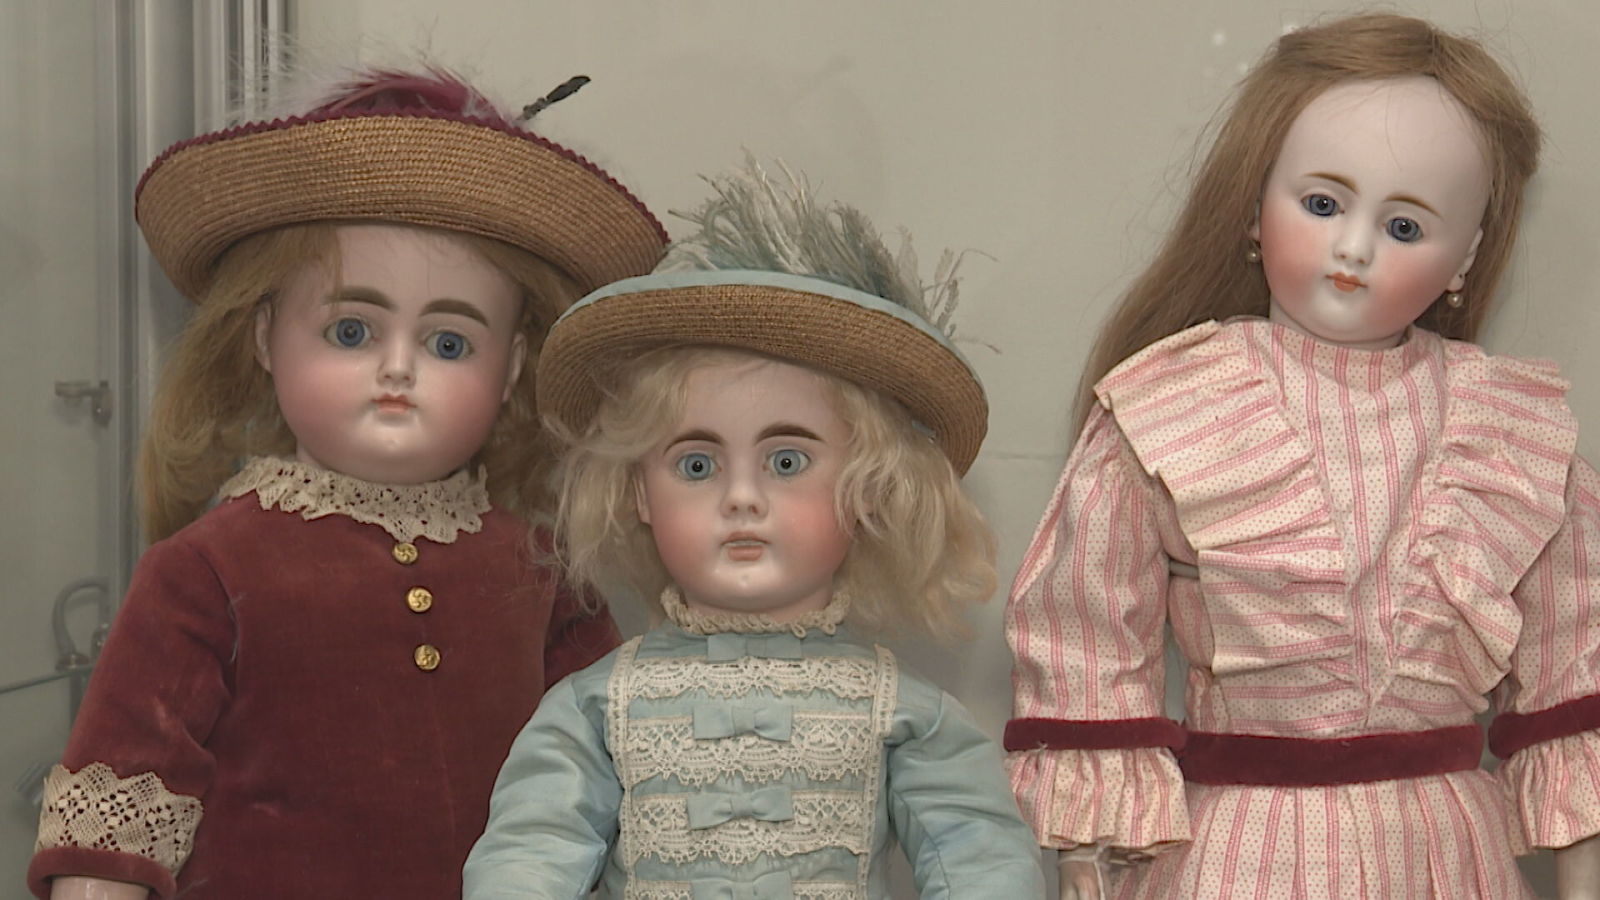 One of the largest collections of dolls ever seen could fetch £500,000 at  Berkshire auction